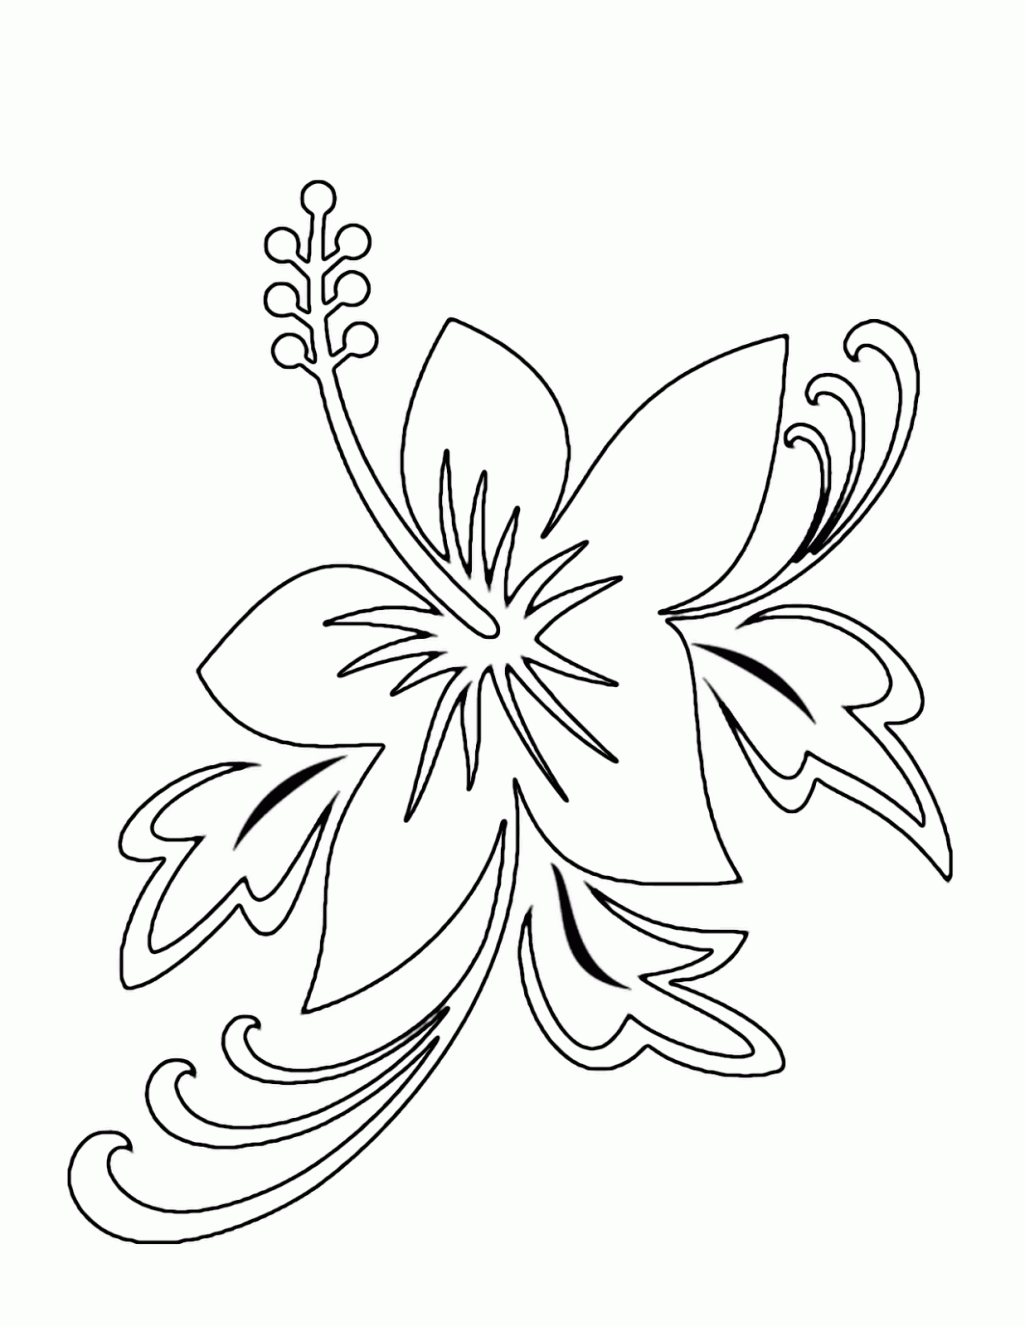 Flower Coloring Pages For Teenagers Coloring Pages Flowers ...